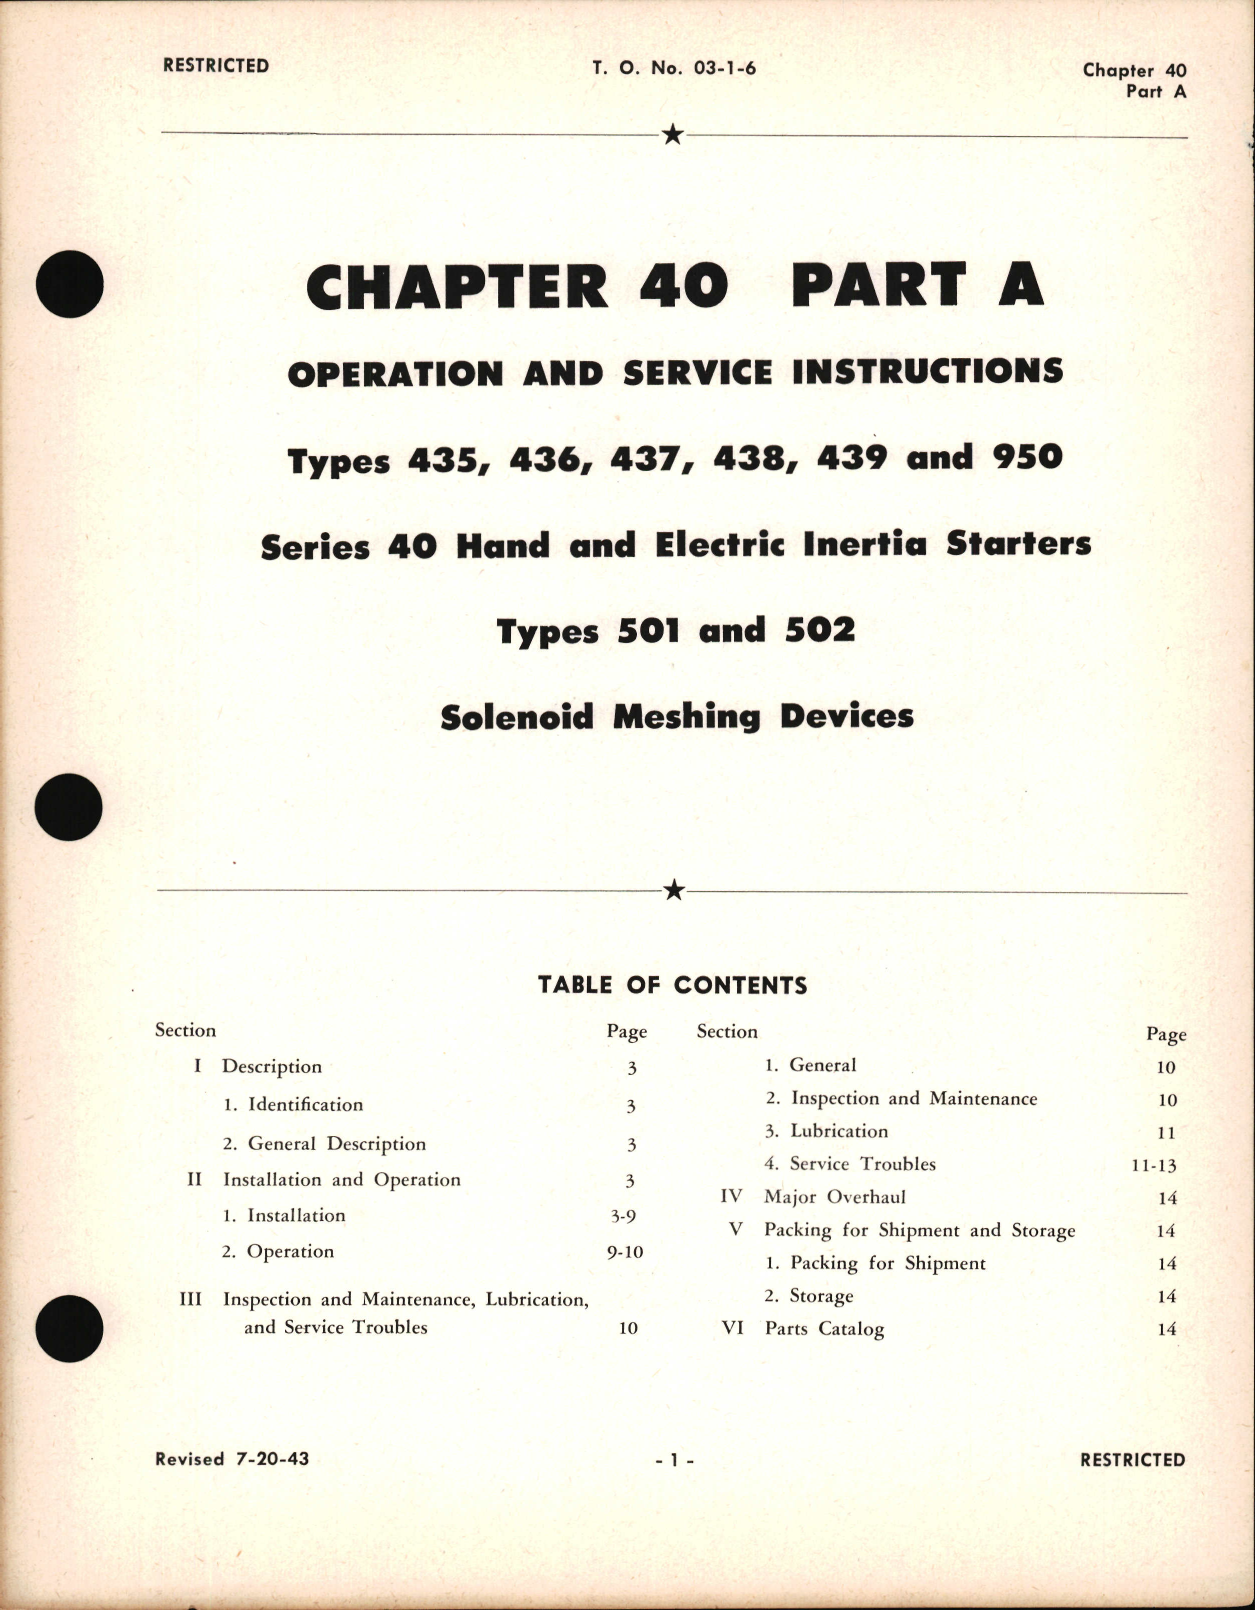 Sample page 1 from AirCorps Library document: Operation and Service Instructions for Hand and Electric Inertia Starters and Solenoid Meshing Devices, Chapter 40 Part A